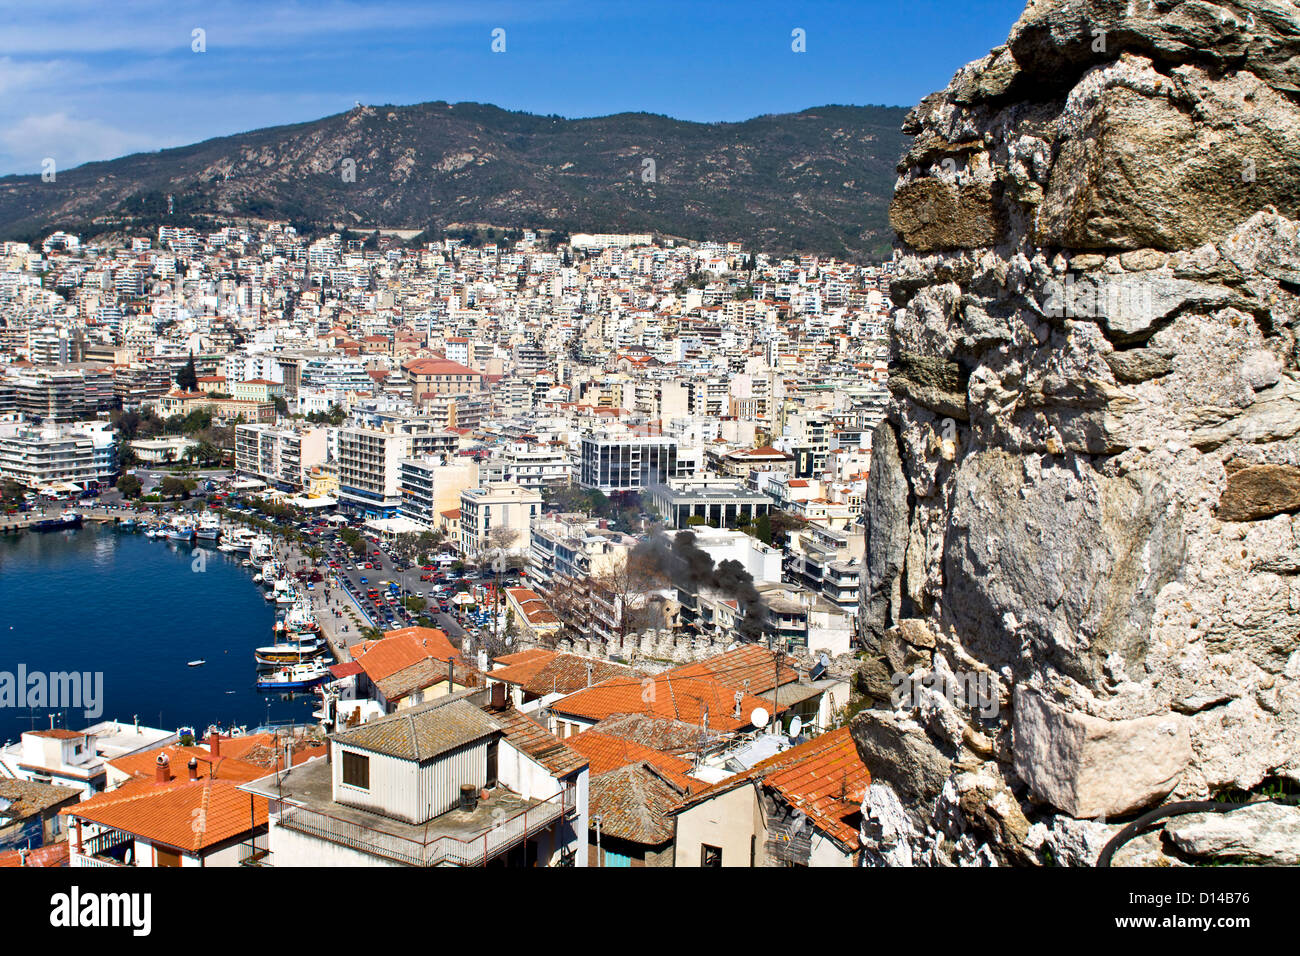 City of Kavala in Greece (summer resort place ) Stock Photo